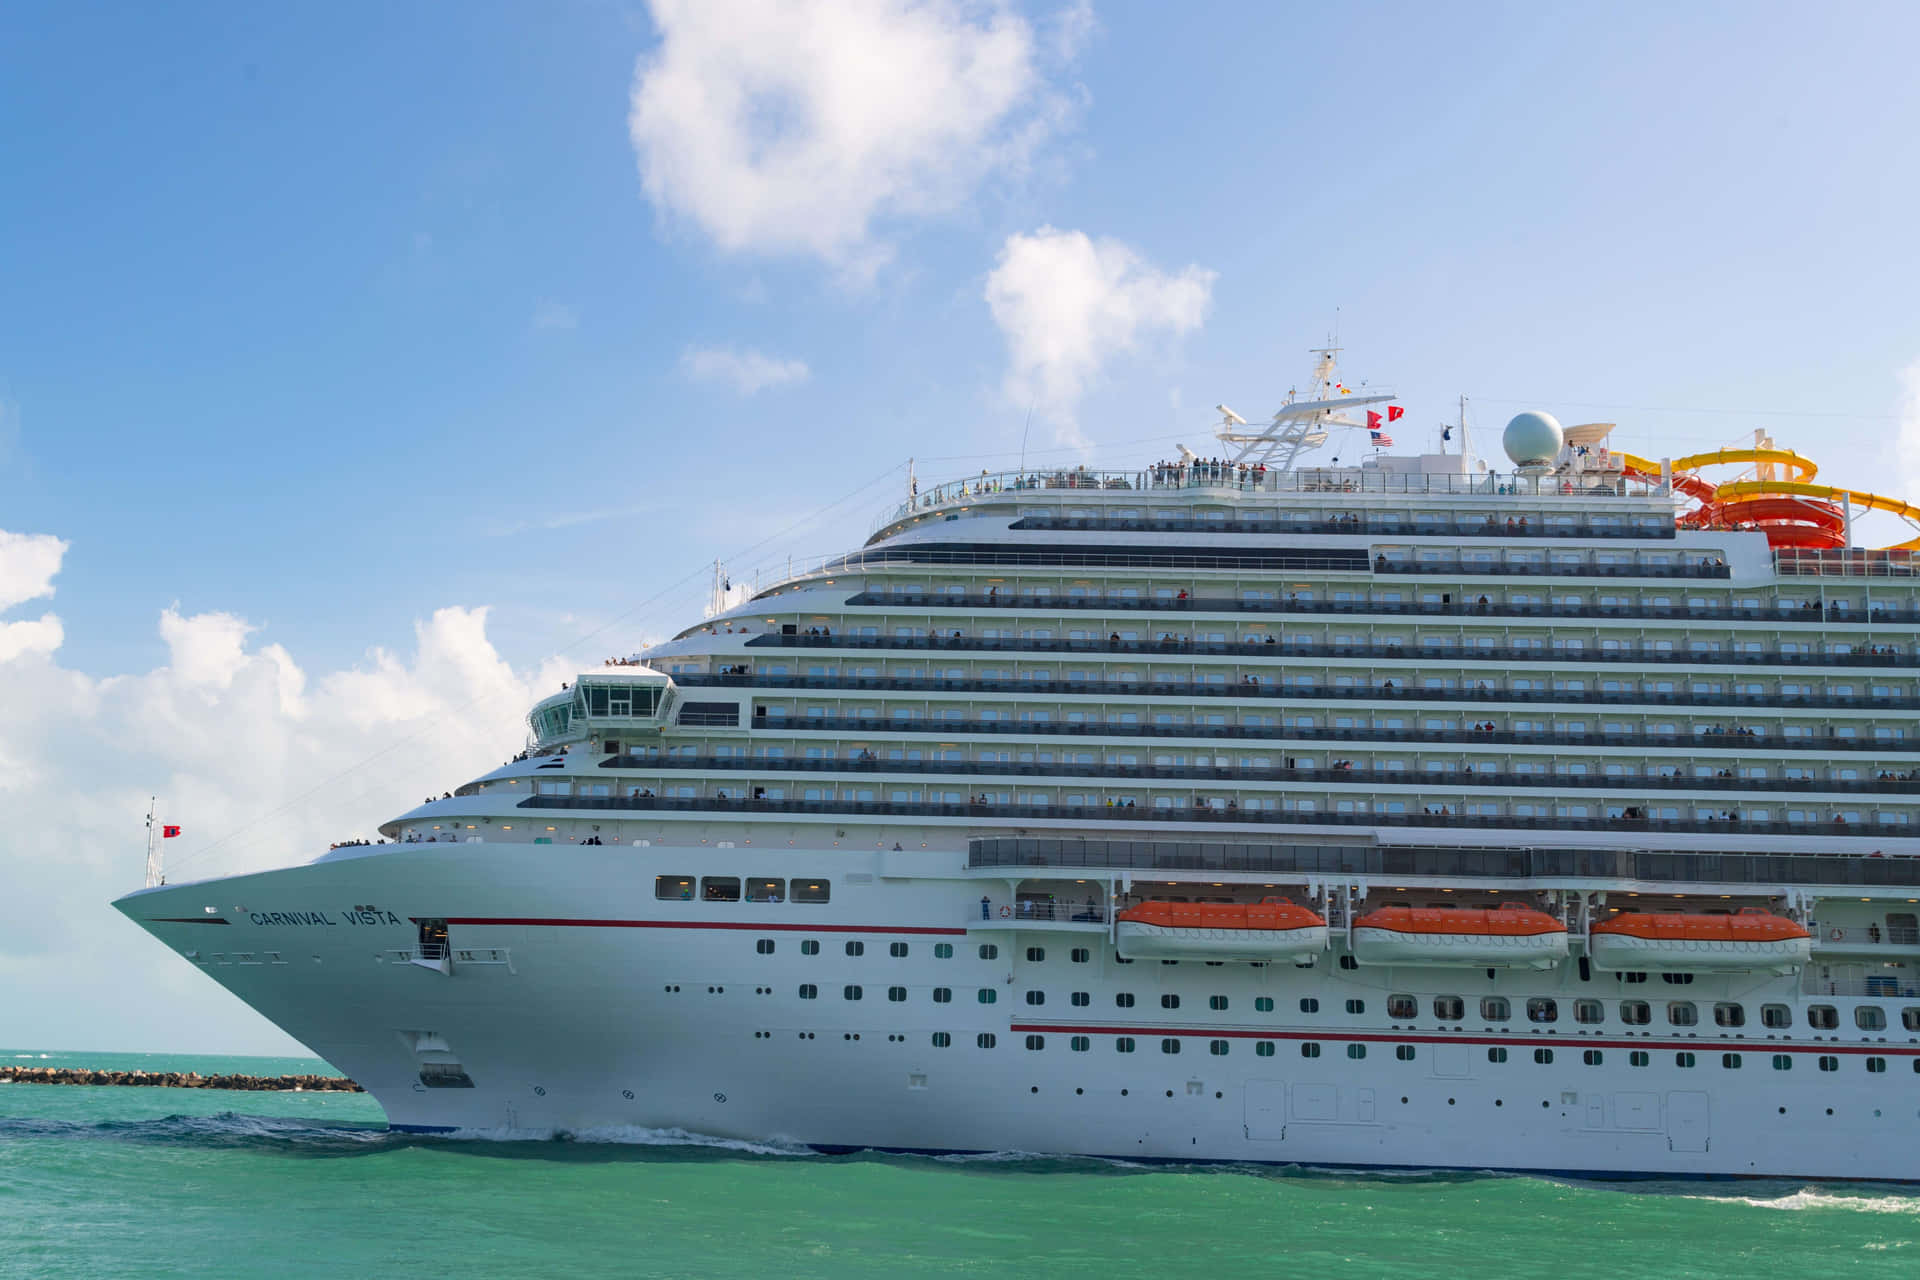 Experience paradise when you cruise with Carnival Dream.